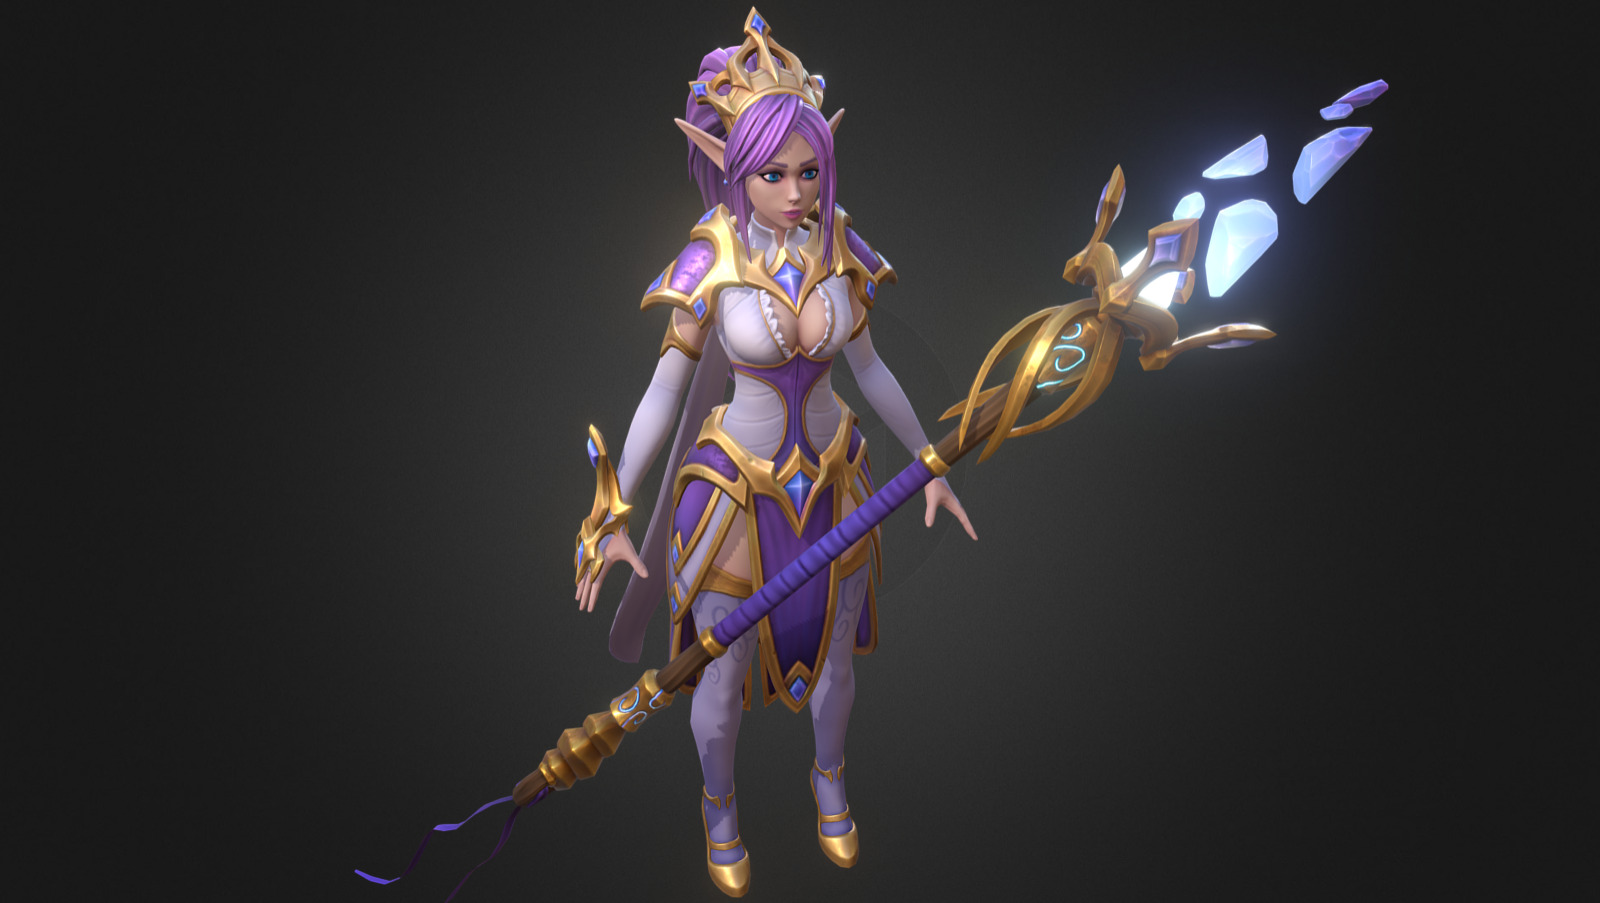 Wip of a new model for Minion Masters. Made by Mona Skoog and Martin prestegaard - WIP - Arcane Mage Champion - 3D model by Martin Prestegaard (@martinprestegaard) 3d model